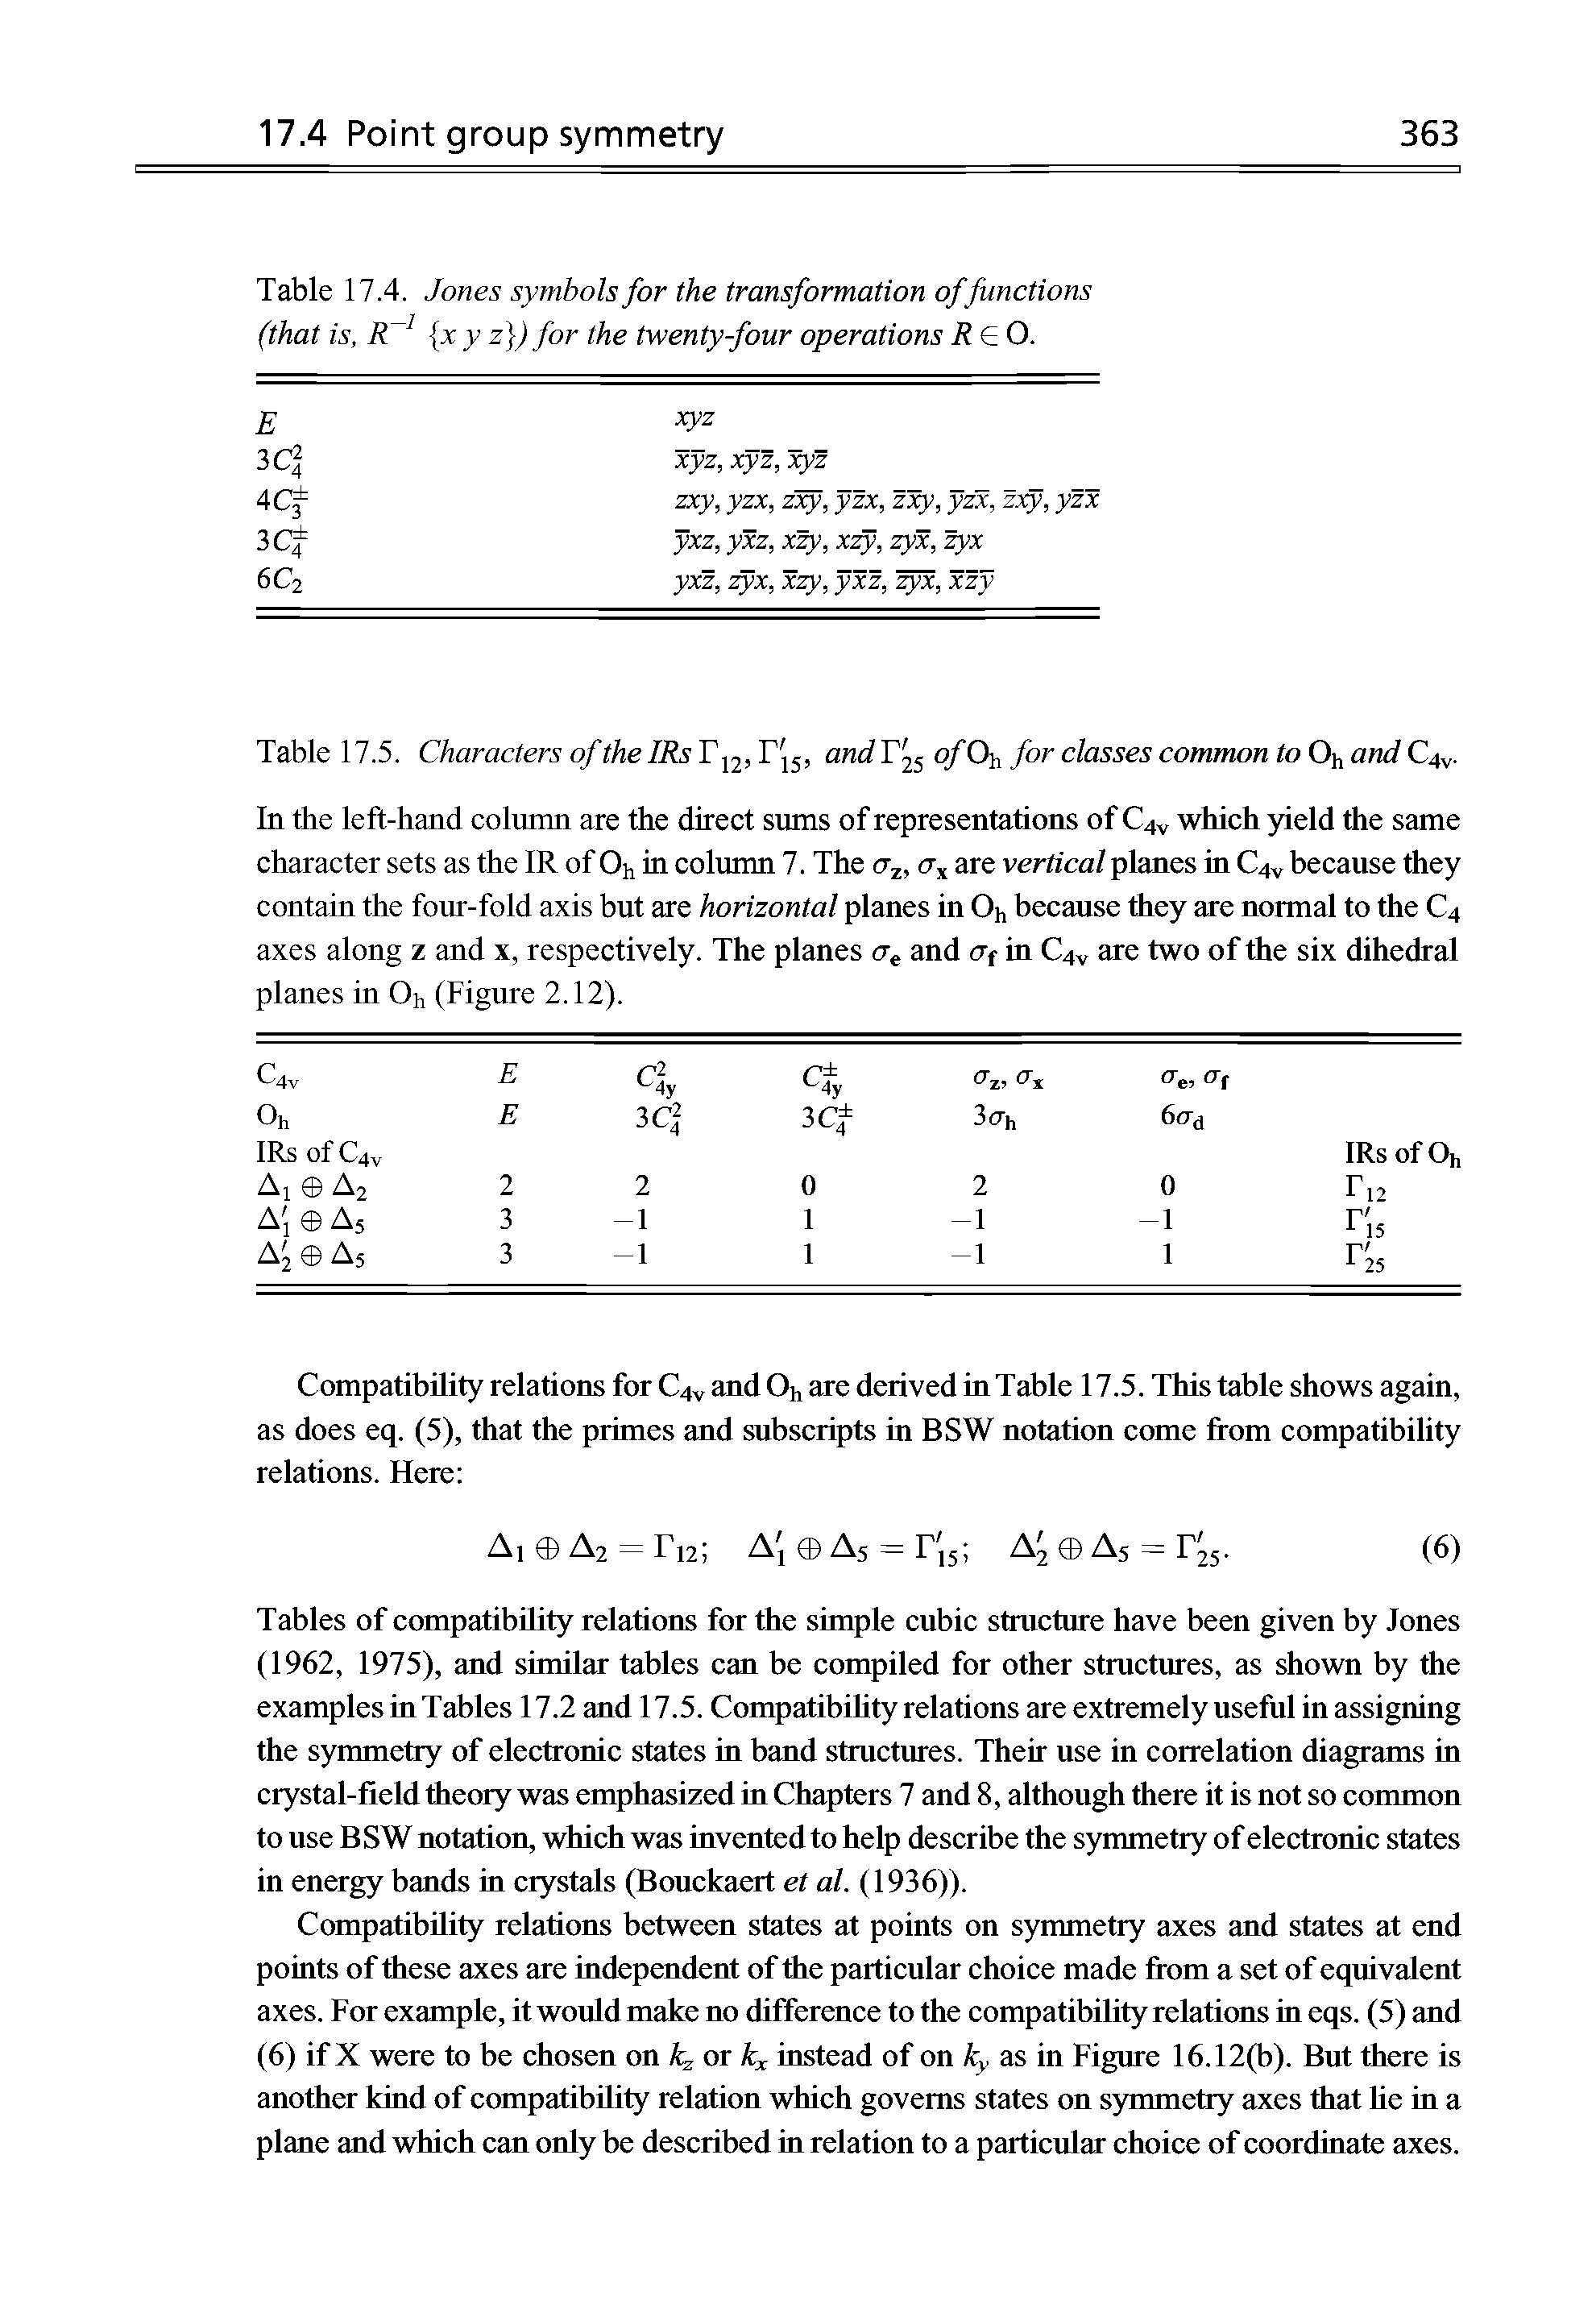 Tables of compatibility relations for the simple cubic structure have been given by Jones (1962, 1975), and similar tables can be compiled for other structures, as shown by the examples in Tables 17.2 and 17.5. Compatibility relations are extremely useful in assigning the symmetry of electronic states in band structures. Their use in correlation diagrams in crystal-field theory was emphasized in Chapters 7 and 8, although there it is not so common to use B SW notation, which was invented to help describe the symmetry of electronic states in energy bands in crystals (Bouckaert el al. (1936)).